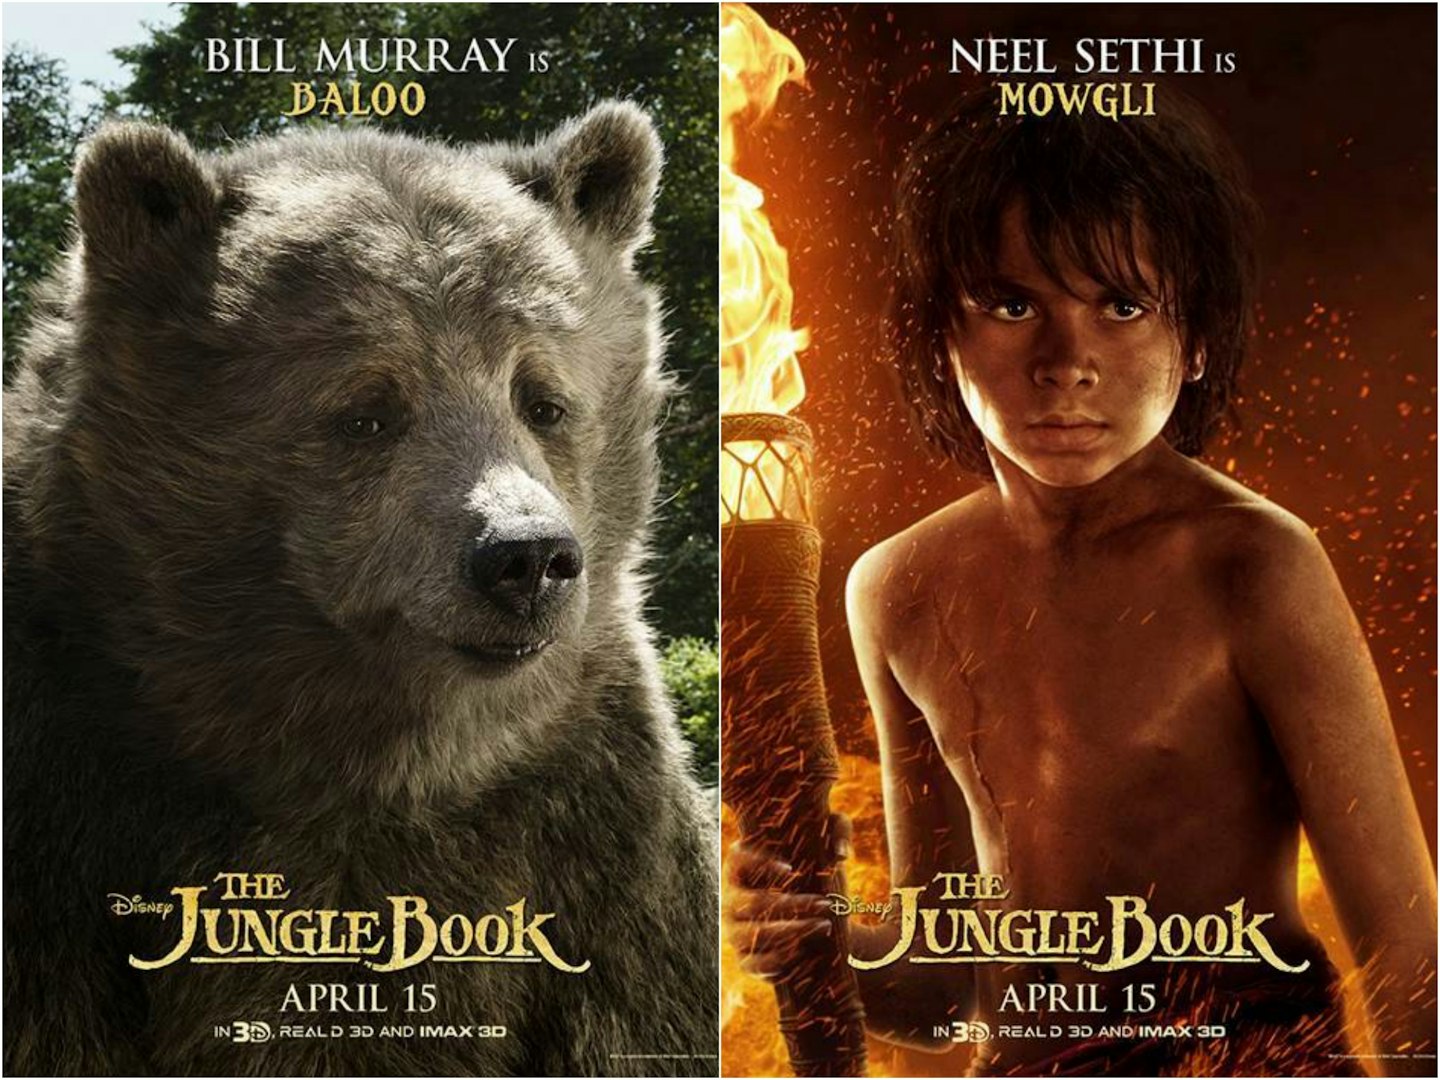 The Jungle Book character posters